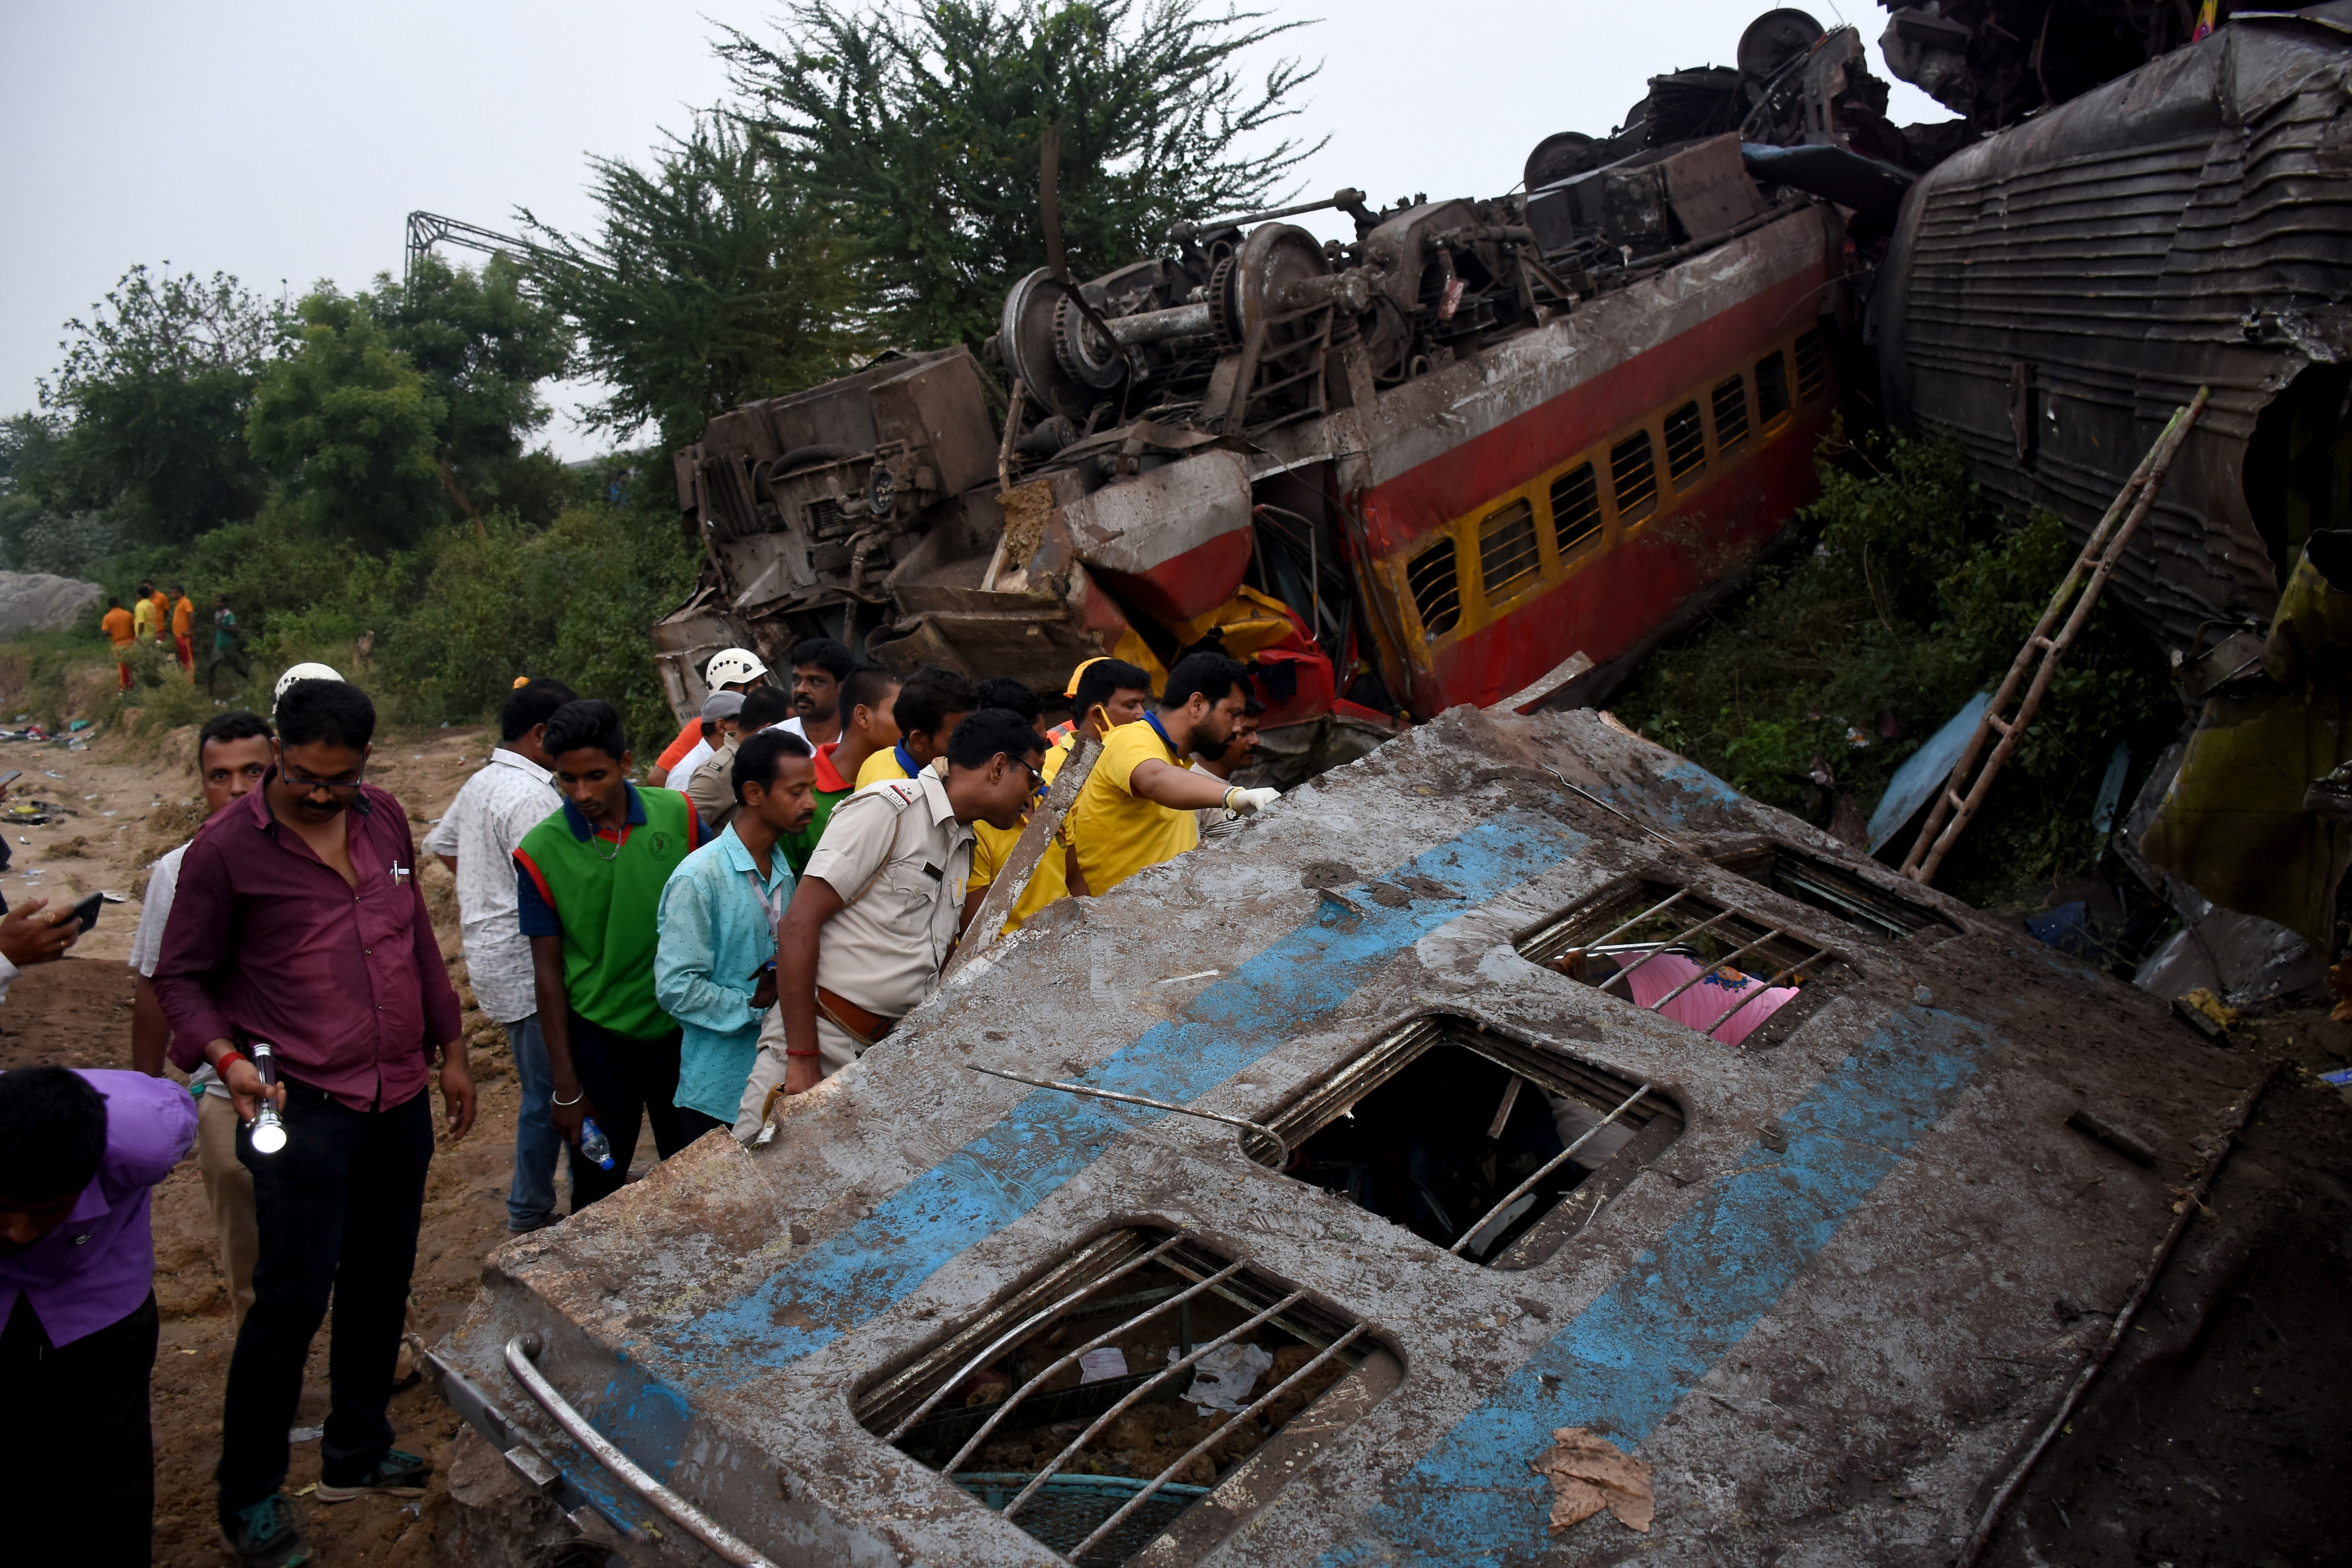 Rescue workers search for survivors after two passenger trains collided in Balasore